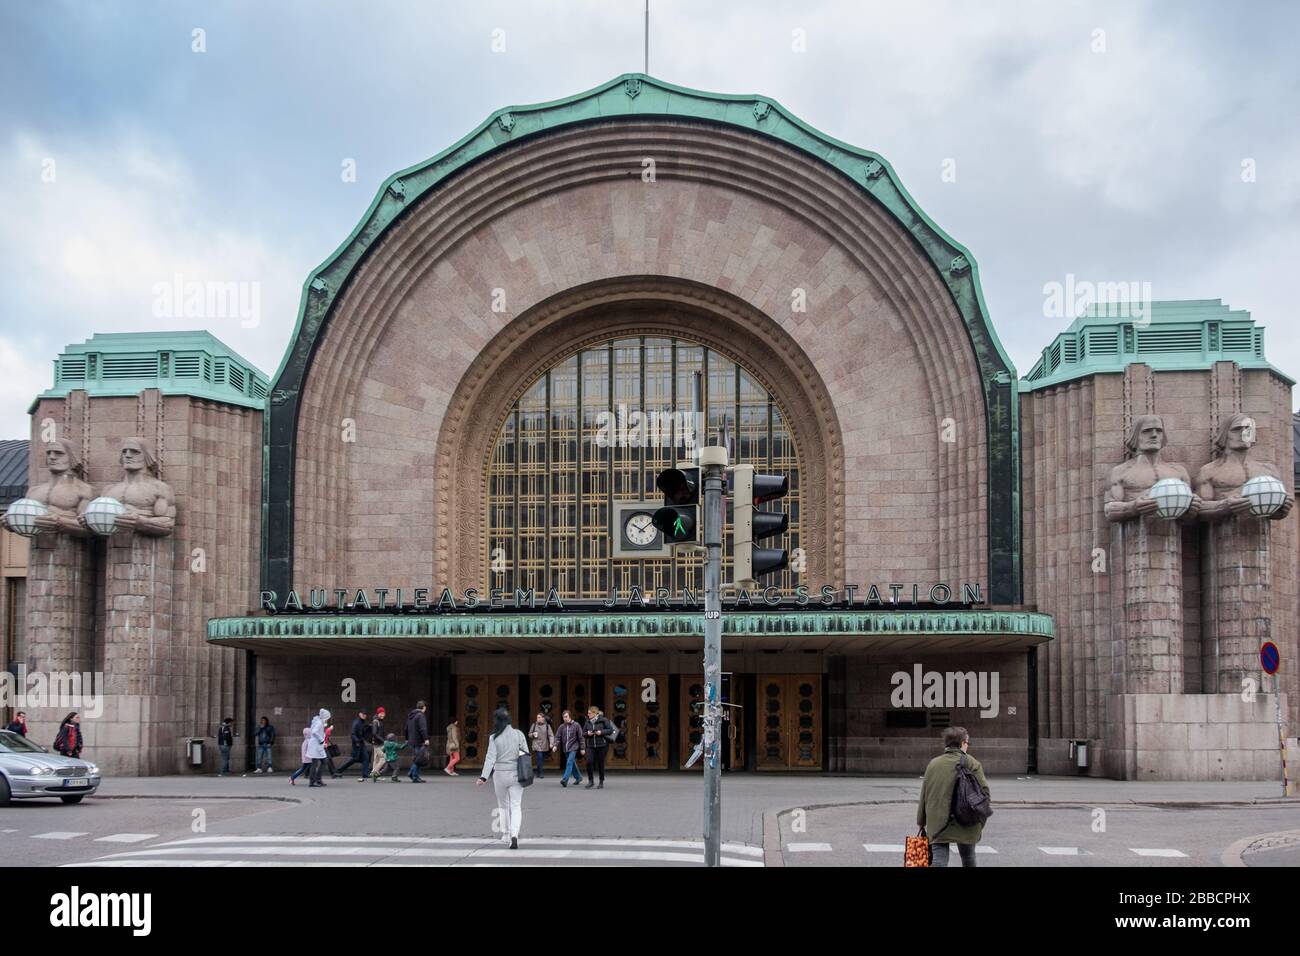 Main entrance to Eliel Saarine's Central Station with stone guardians supporting lights. Helsinki, Finland Stock Photo